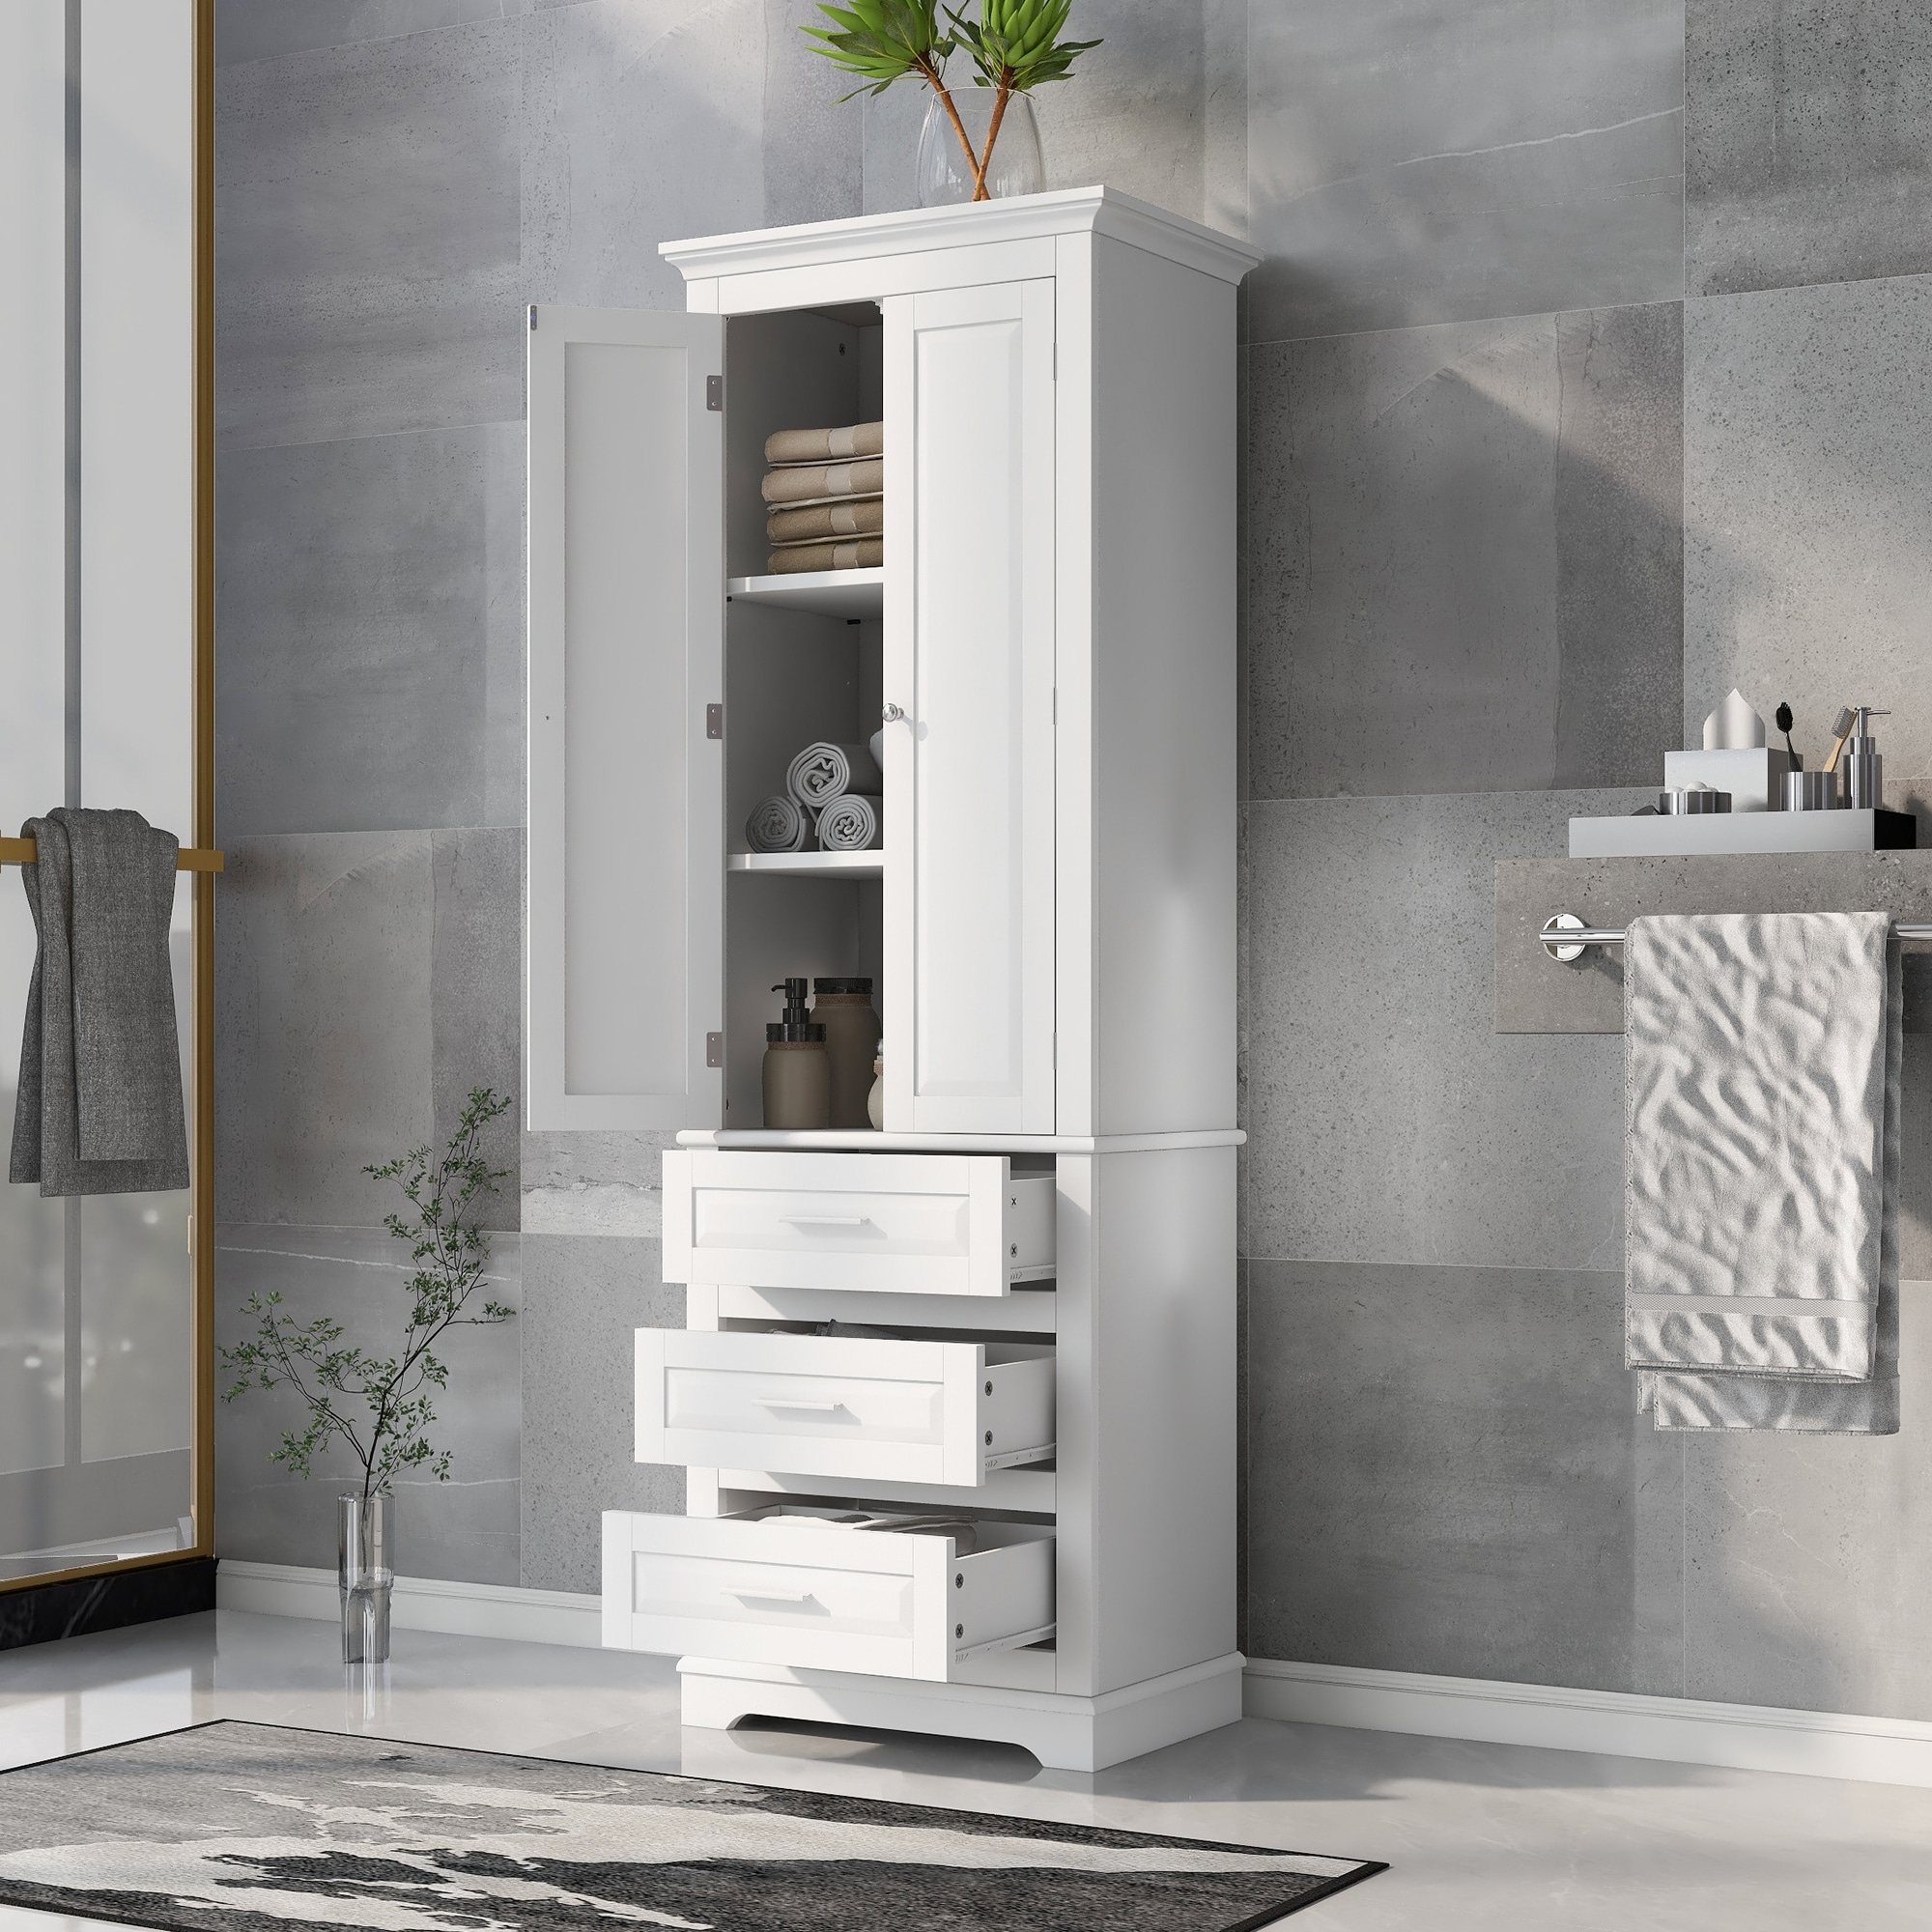 https://ak1.ostkcdn.com/images/products/is/images/direct/90c538b43e52e773f19eb9a4ed25fe5c7b4f7d7c/Tall-Bathroom-Storage-Cabinet-Freestanding-Wardrobe-with-Storage-Drawers-and-Adjustable-Shelf-for-Office-Bookcase.jpg